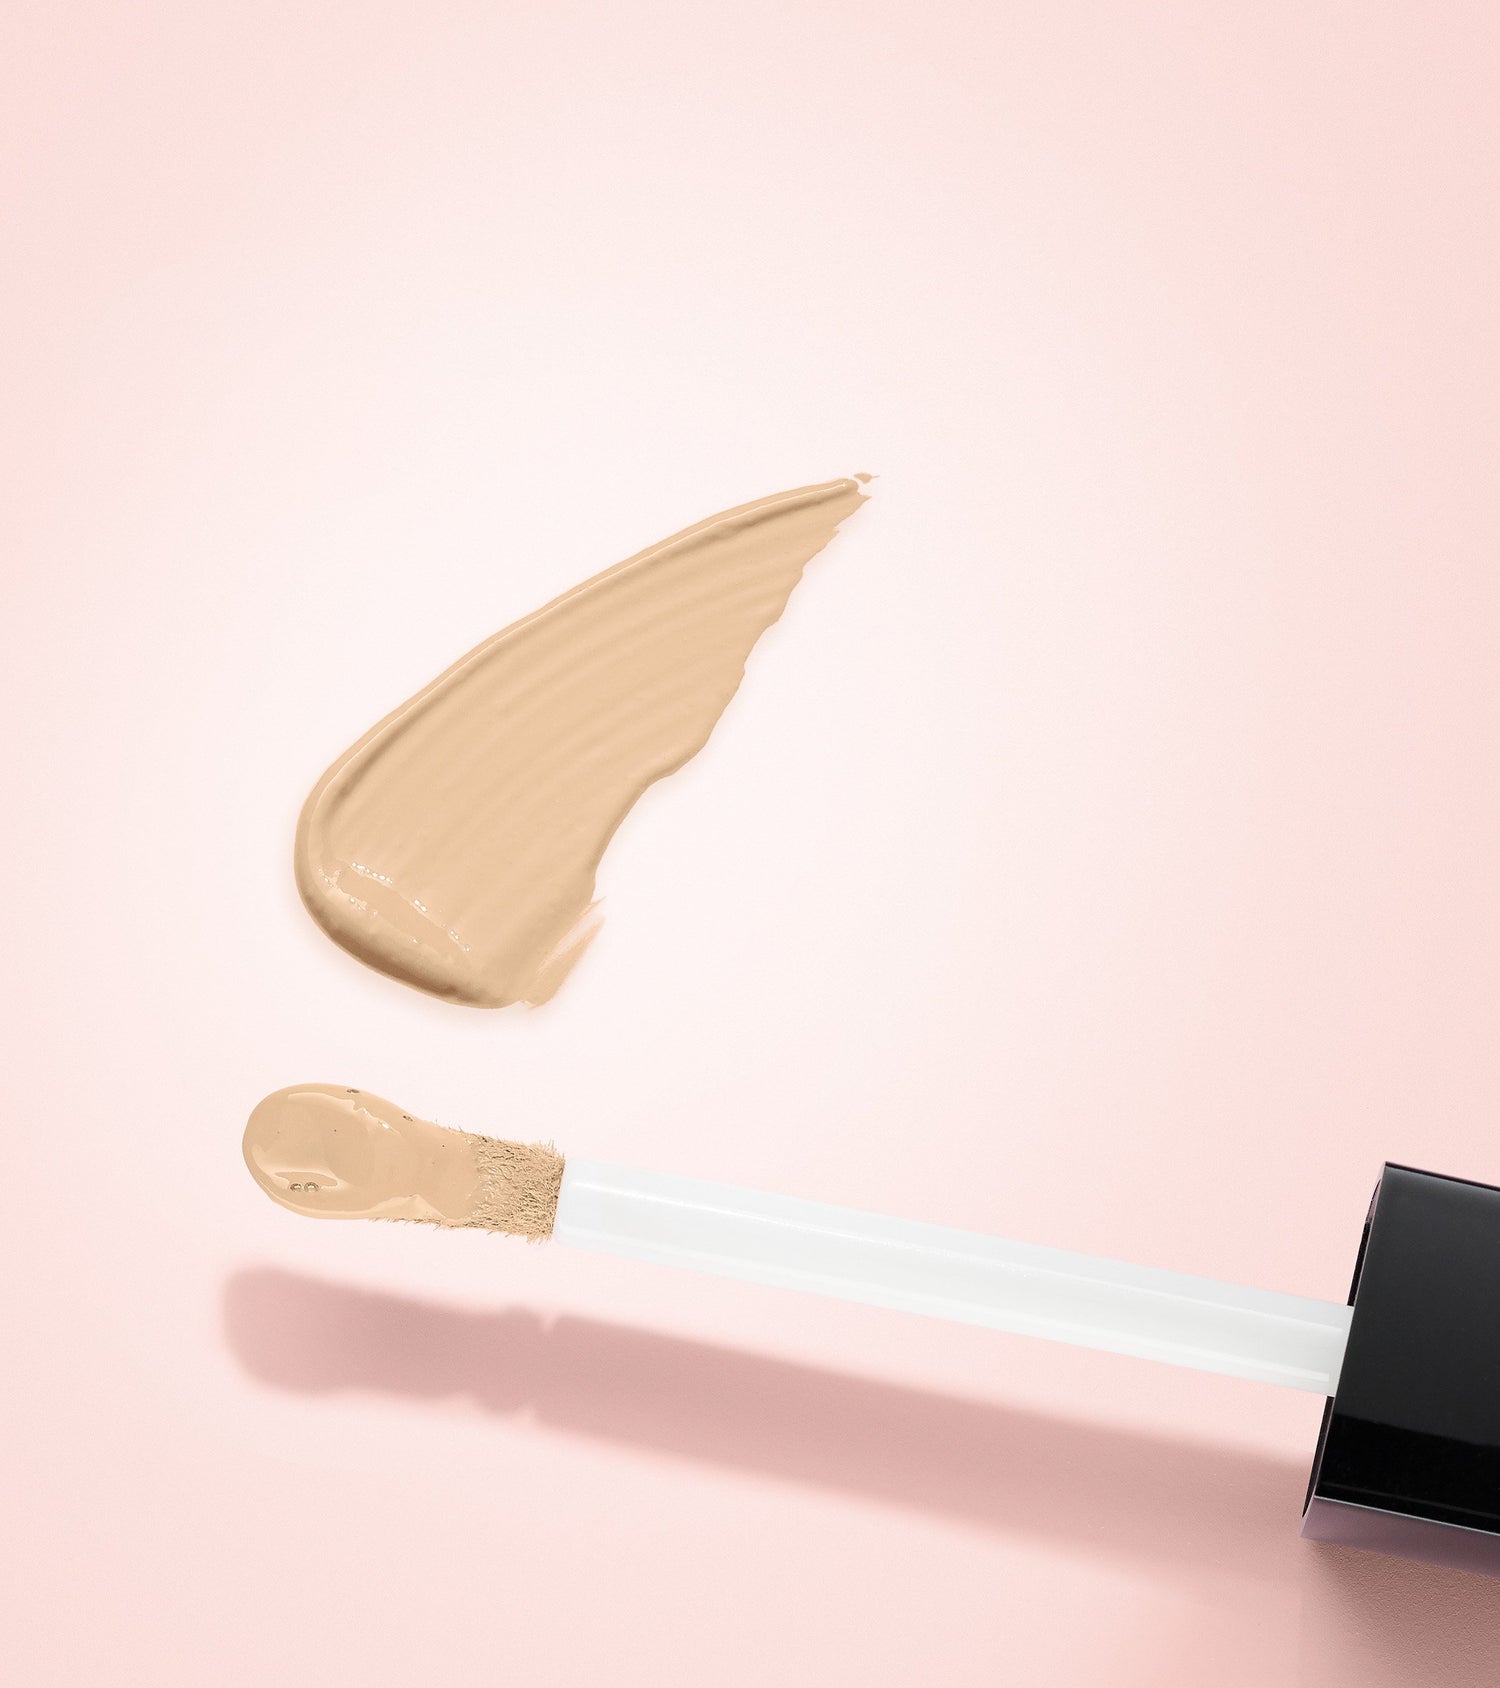 AUTHENTIK SKIN PERFECTOR CONCEALER (060 CREDIBLE) Main Image featured